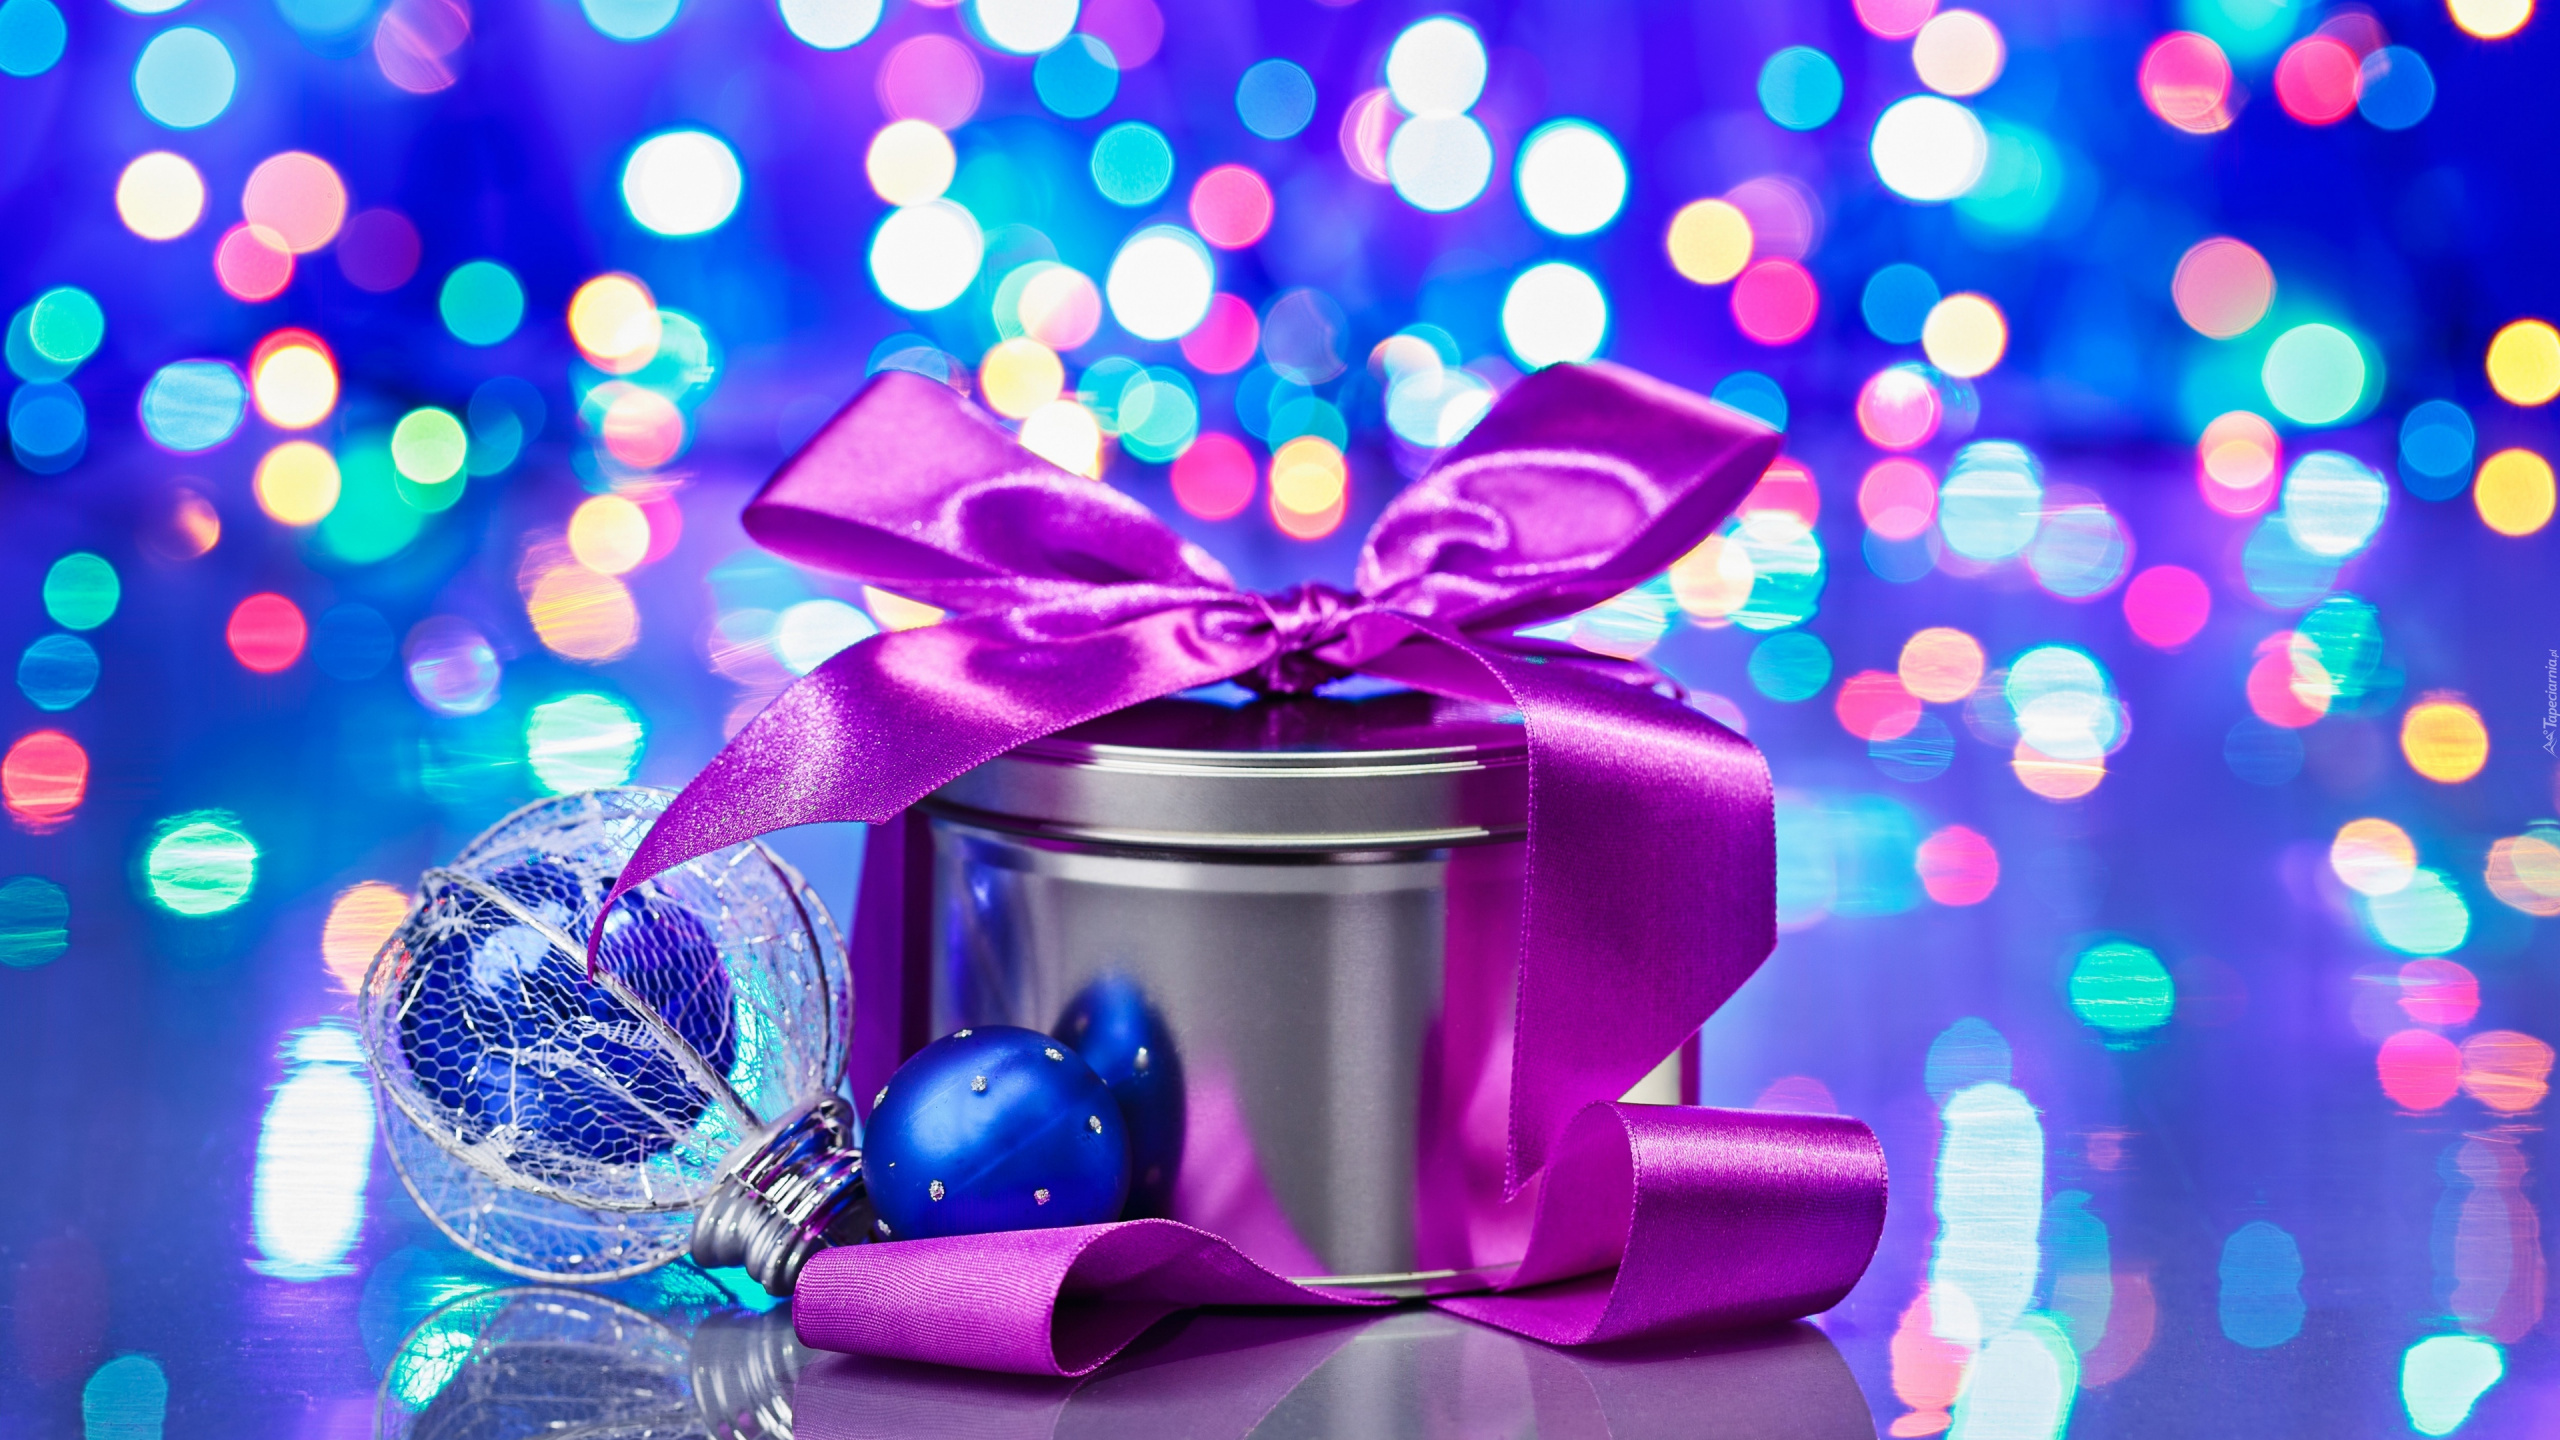 Christmas Day, New Year, Purple, Blue, Violet. Wallpaper in 2560x1440 Resolution